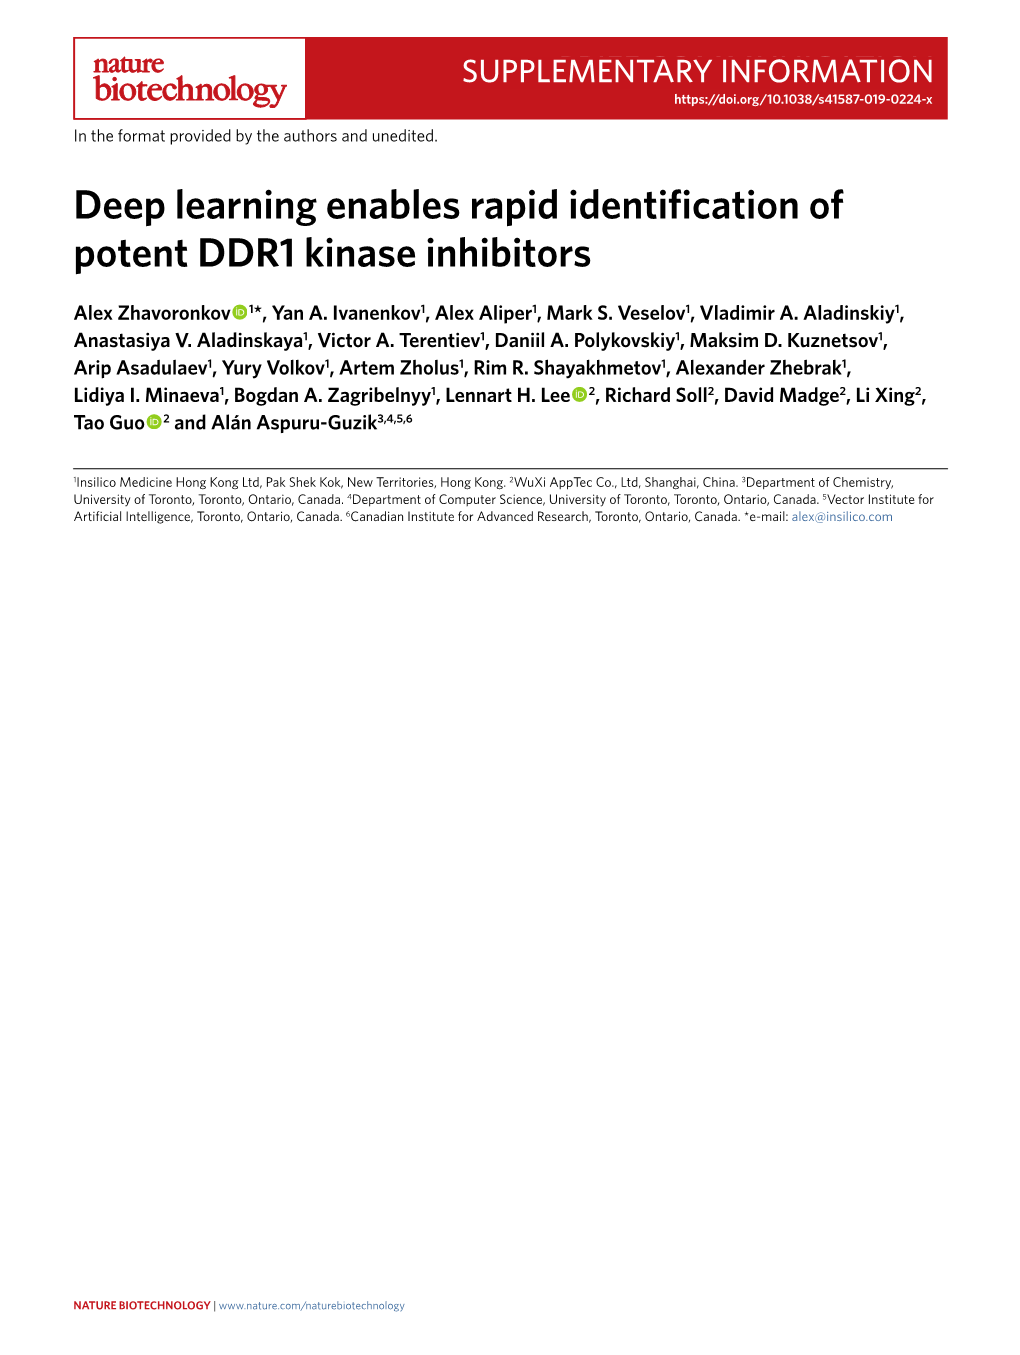 Deep Learning Enables Rapid Identification of Potent DDR1 Kinase Inhibitors